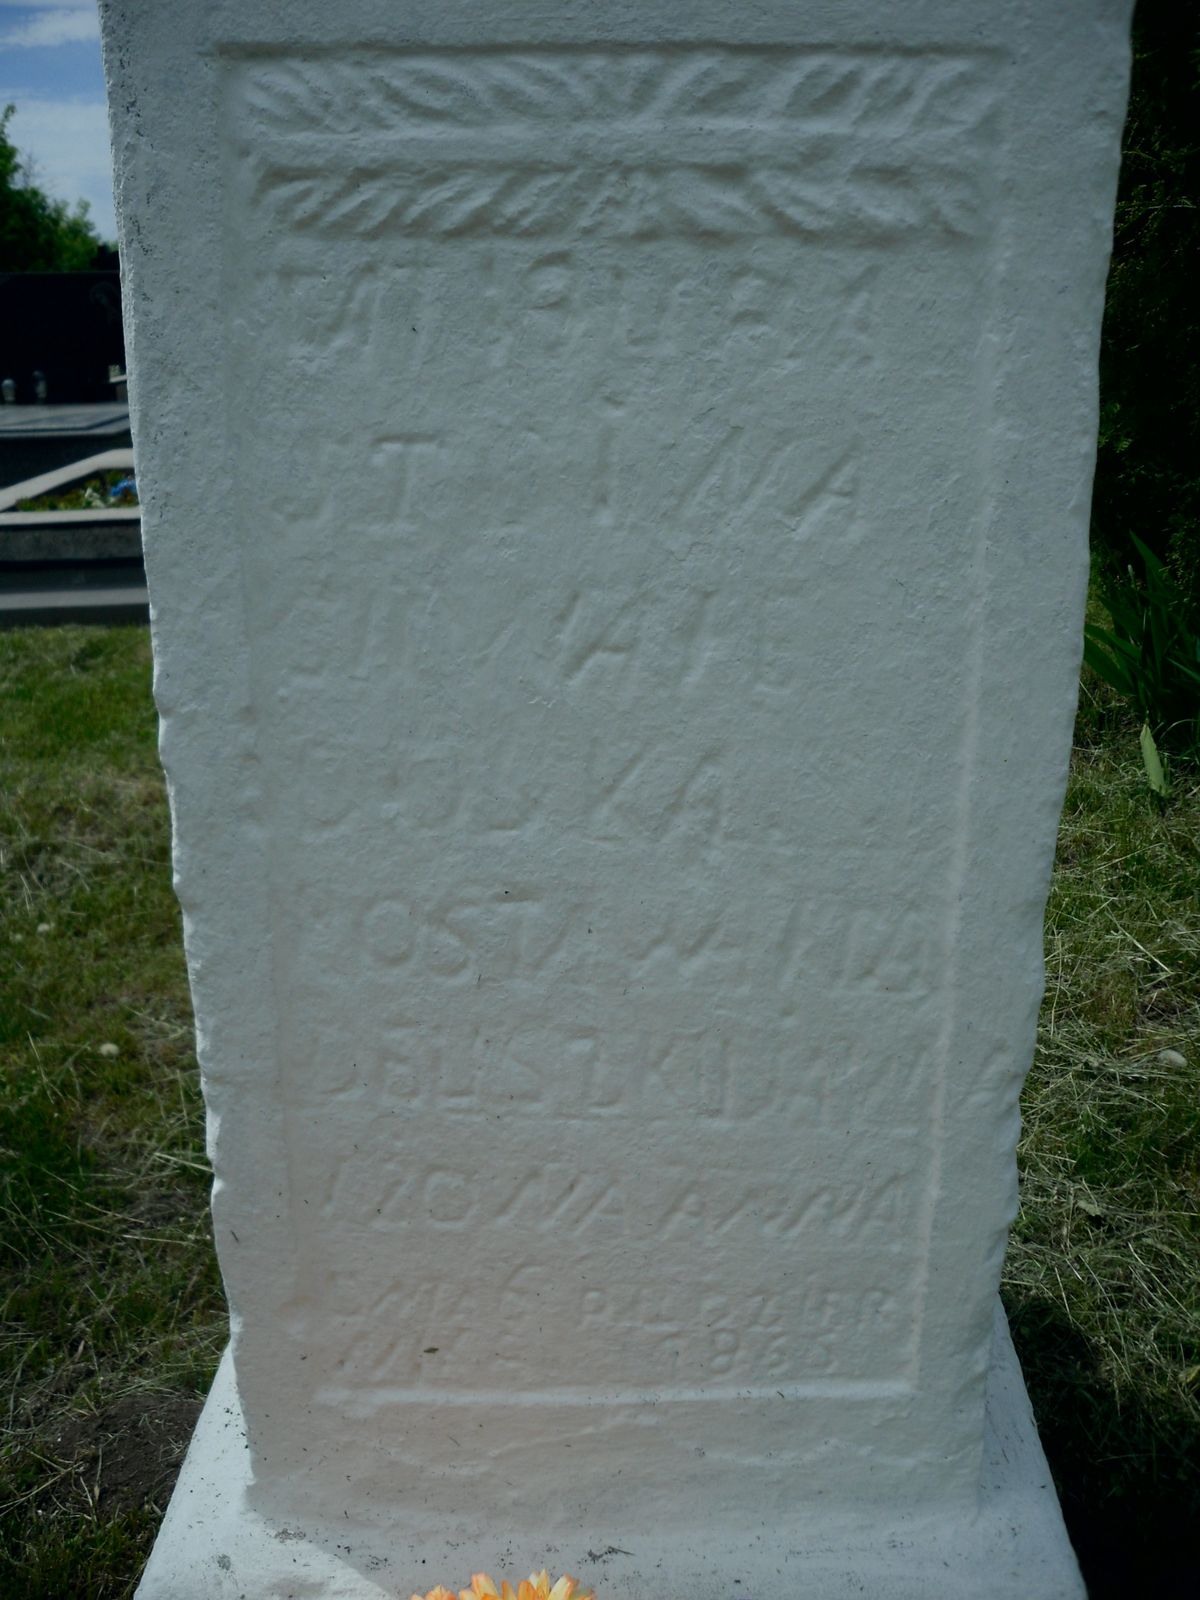 Inscription from the votive monument of Anna and Jan Bezuszko, cemetery in Draganovka